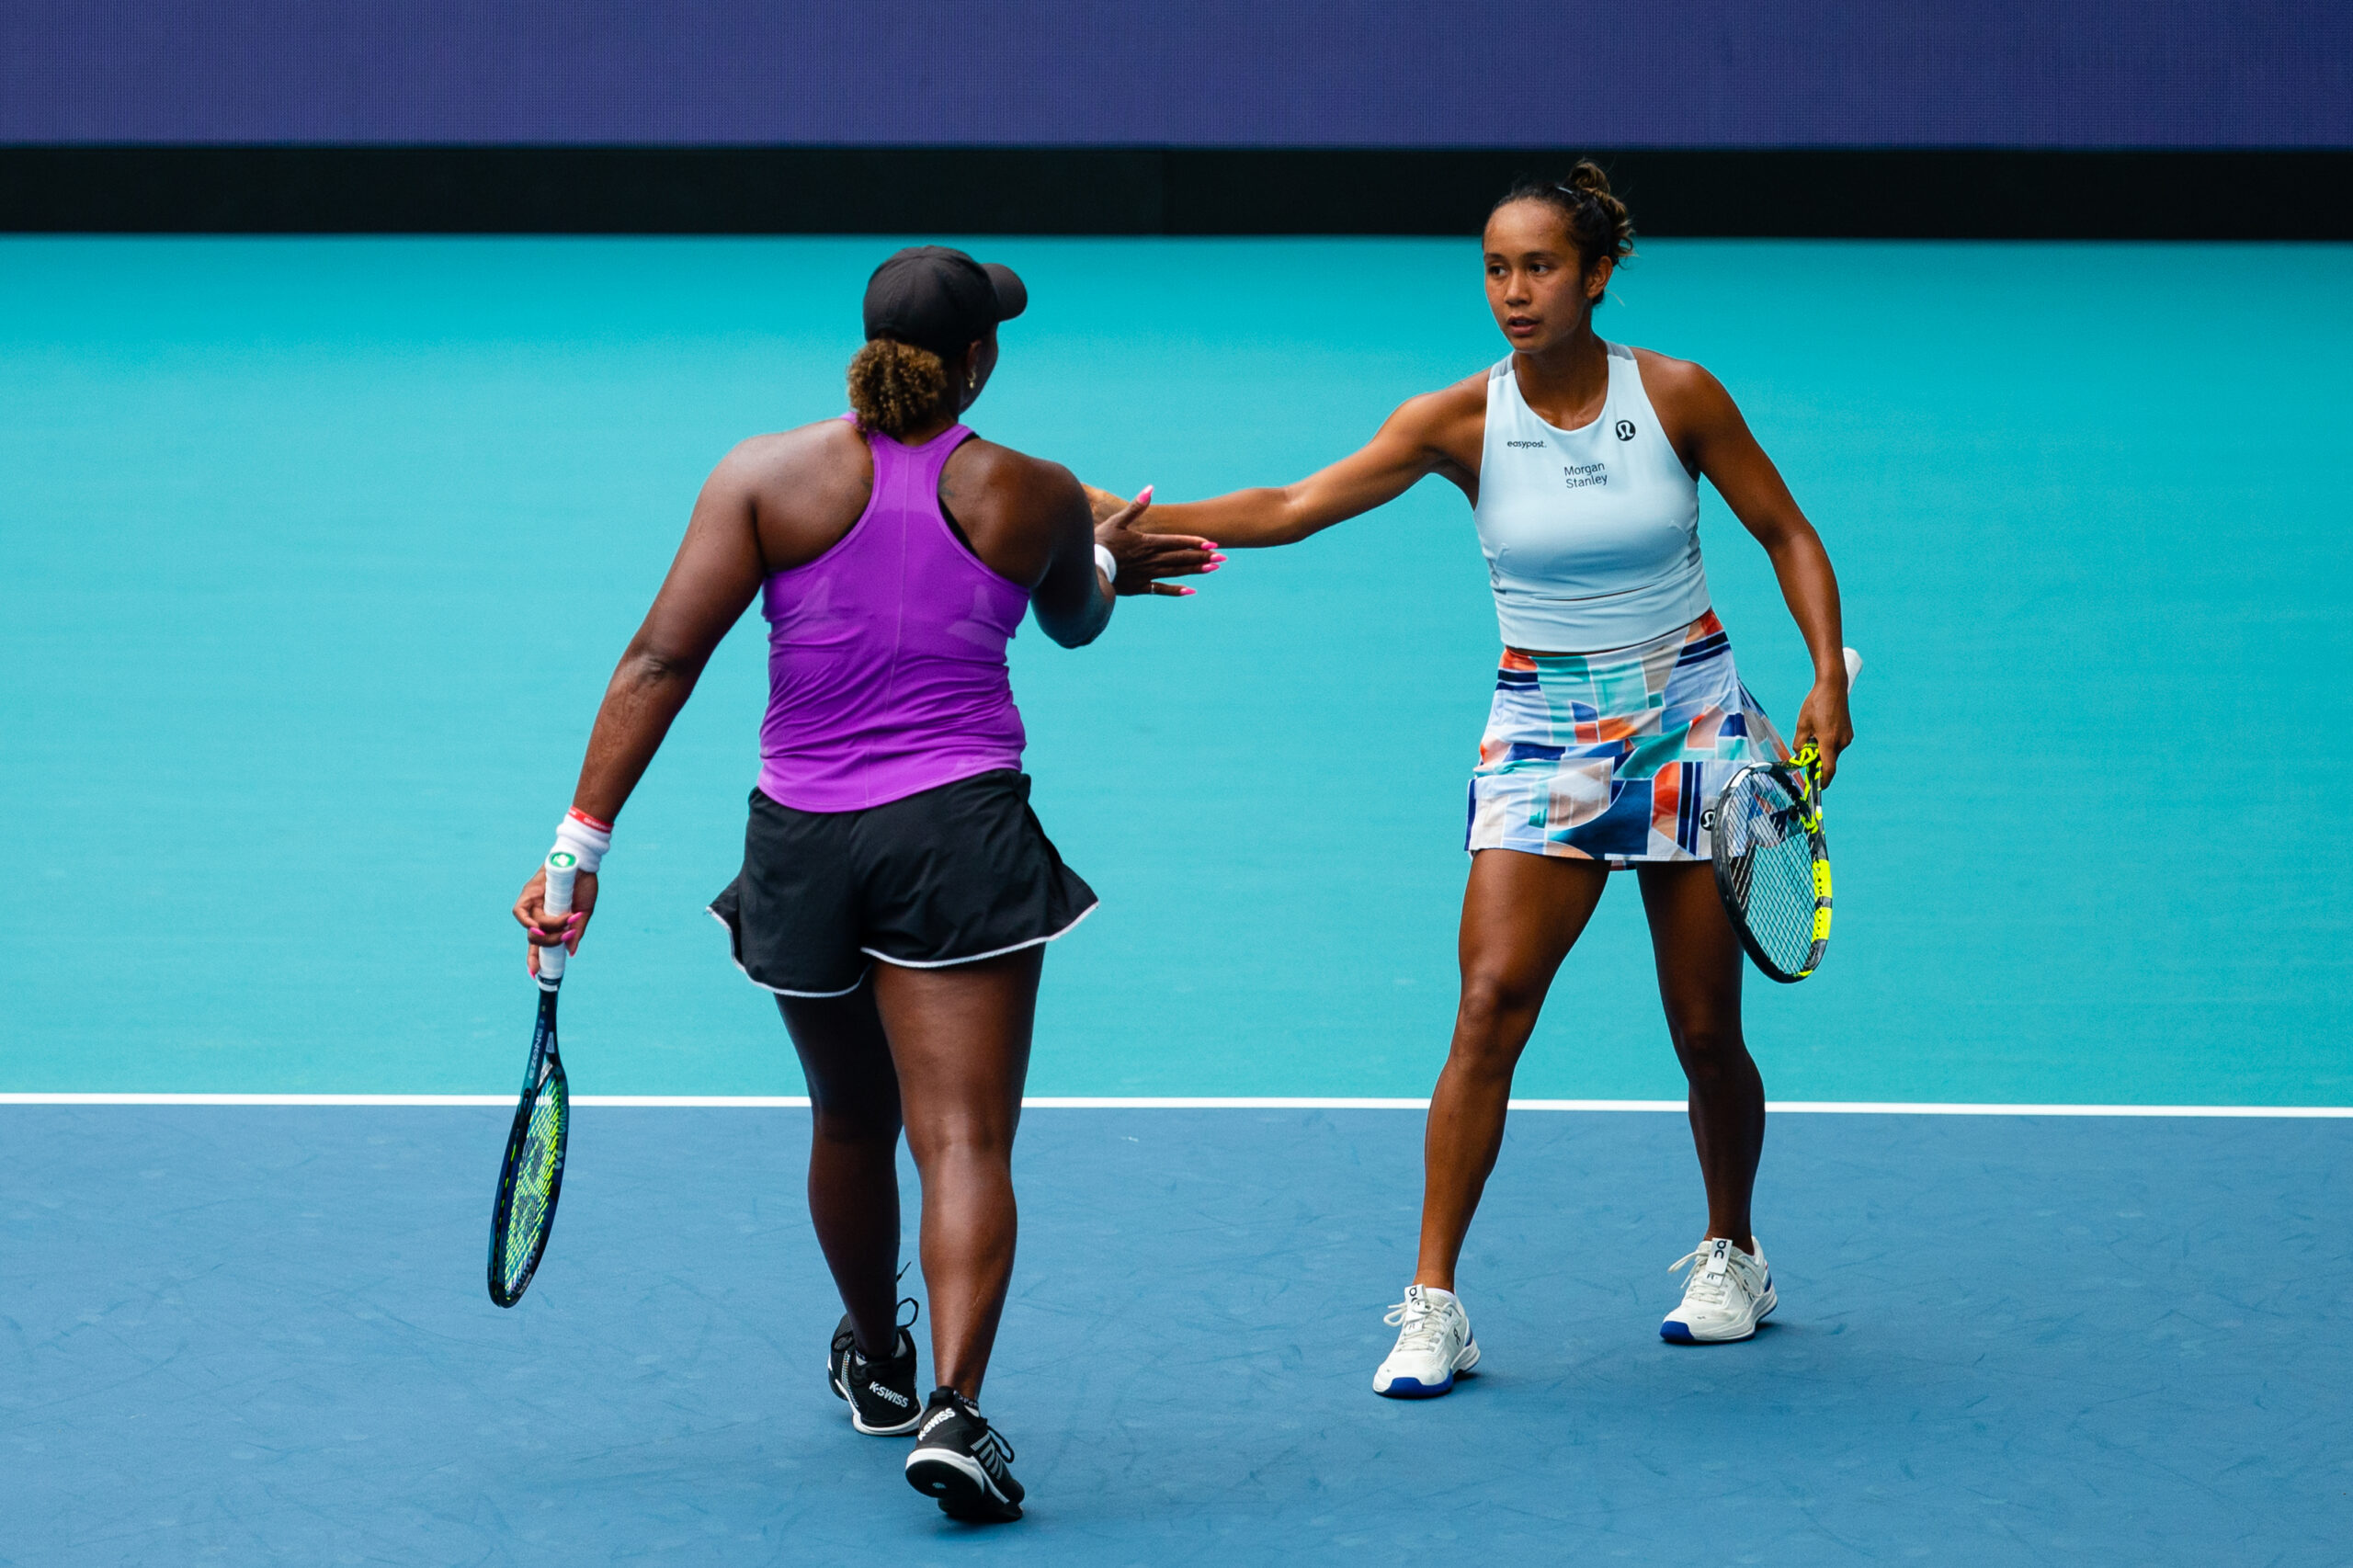 Taylor Townsend and Leylah Fernandez encourage each other during the 2023 Miami Open Women's Doubles Final on April 2, 2023.